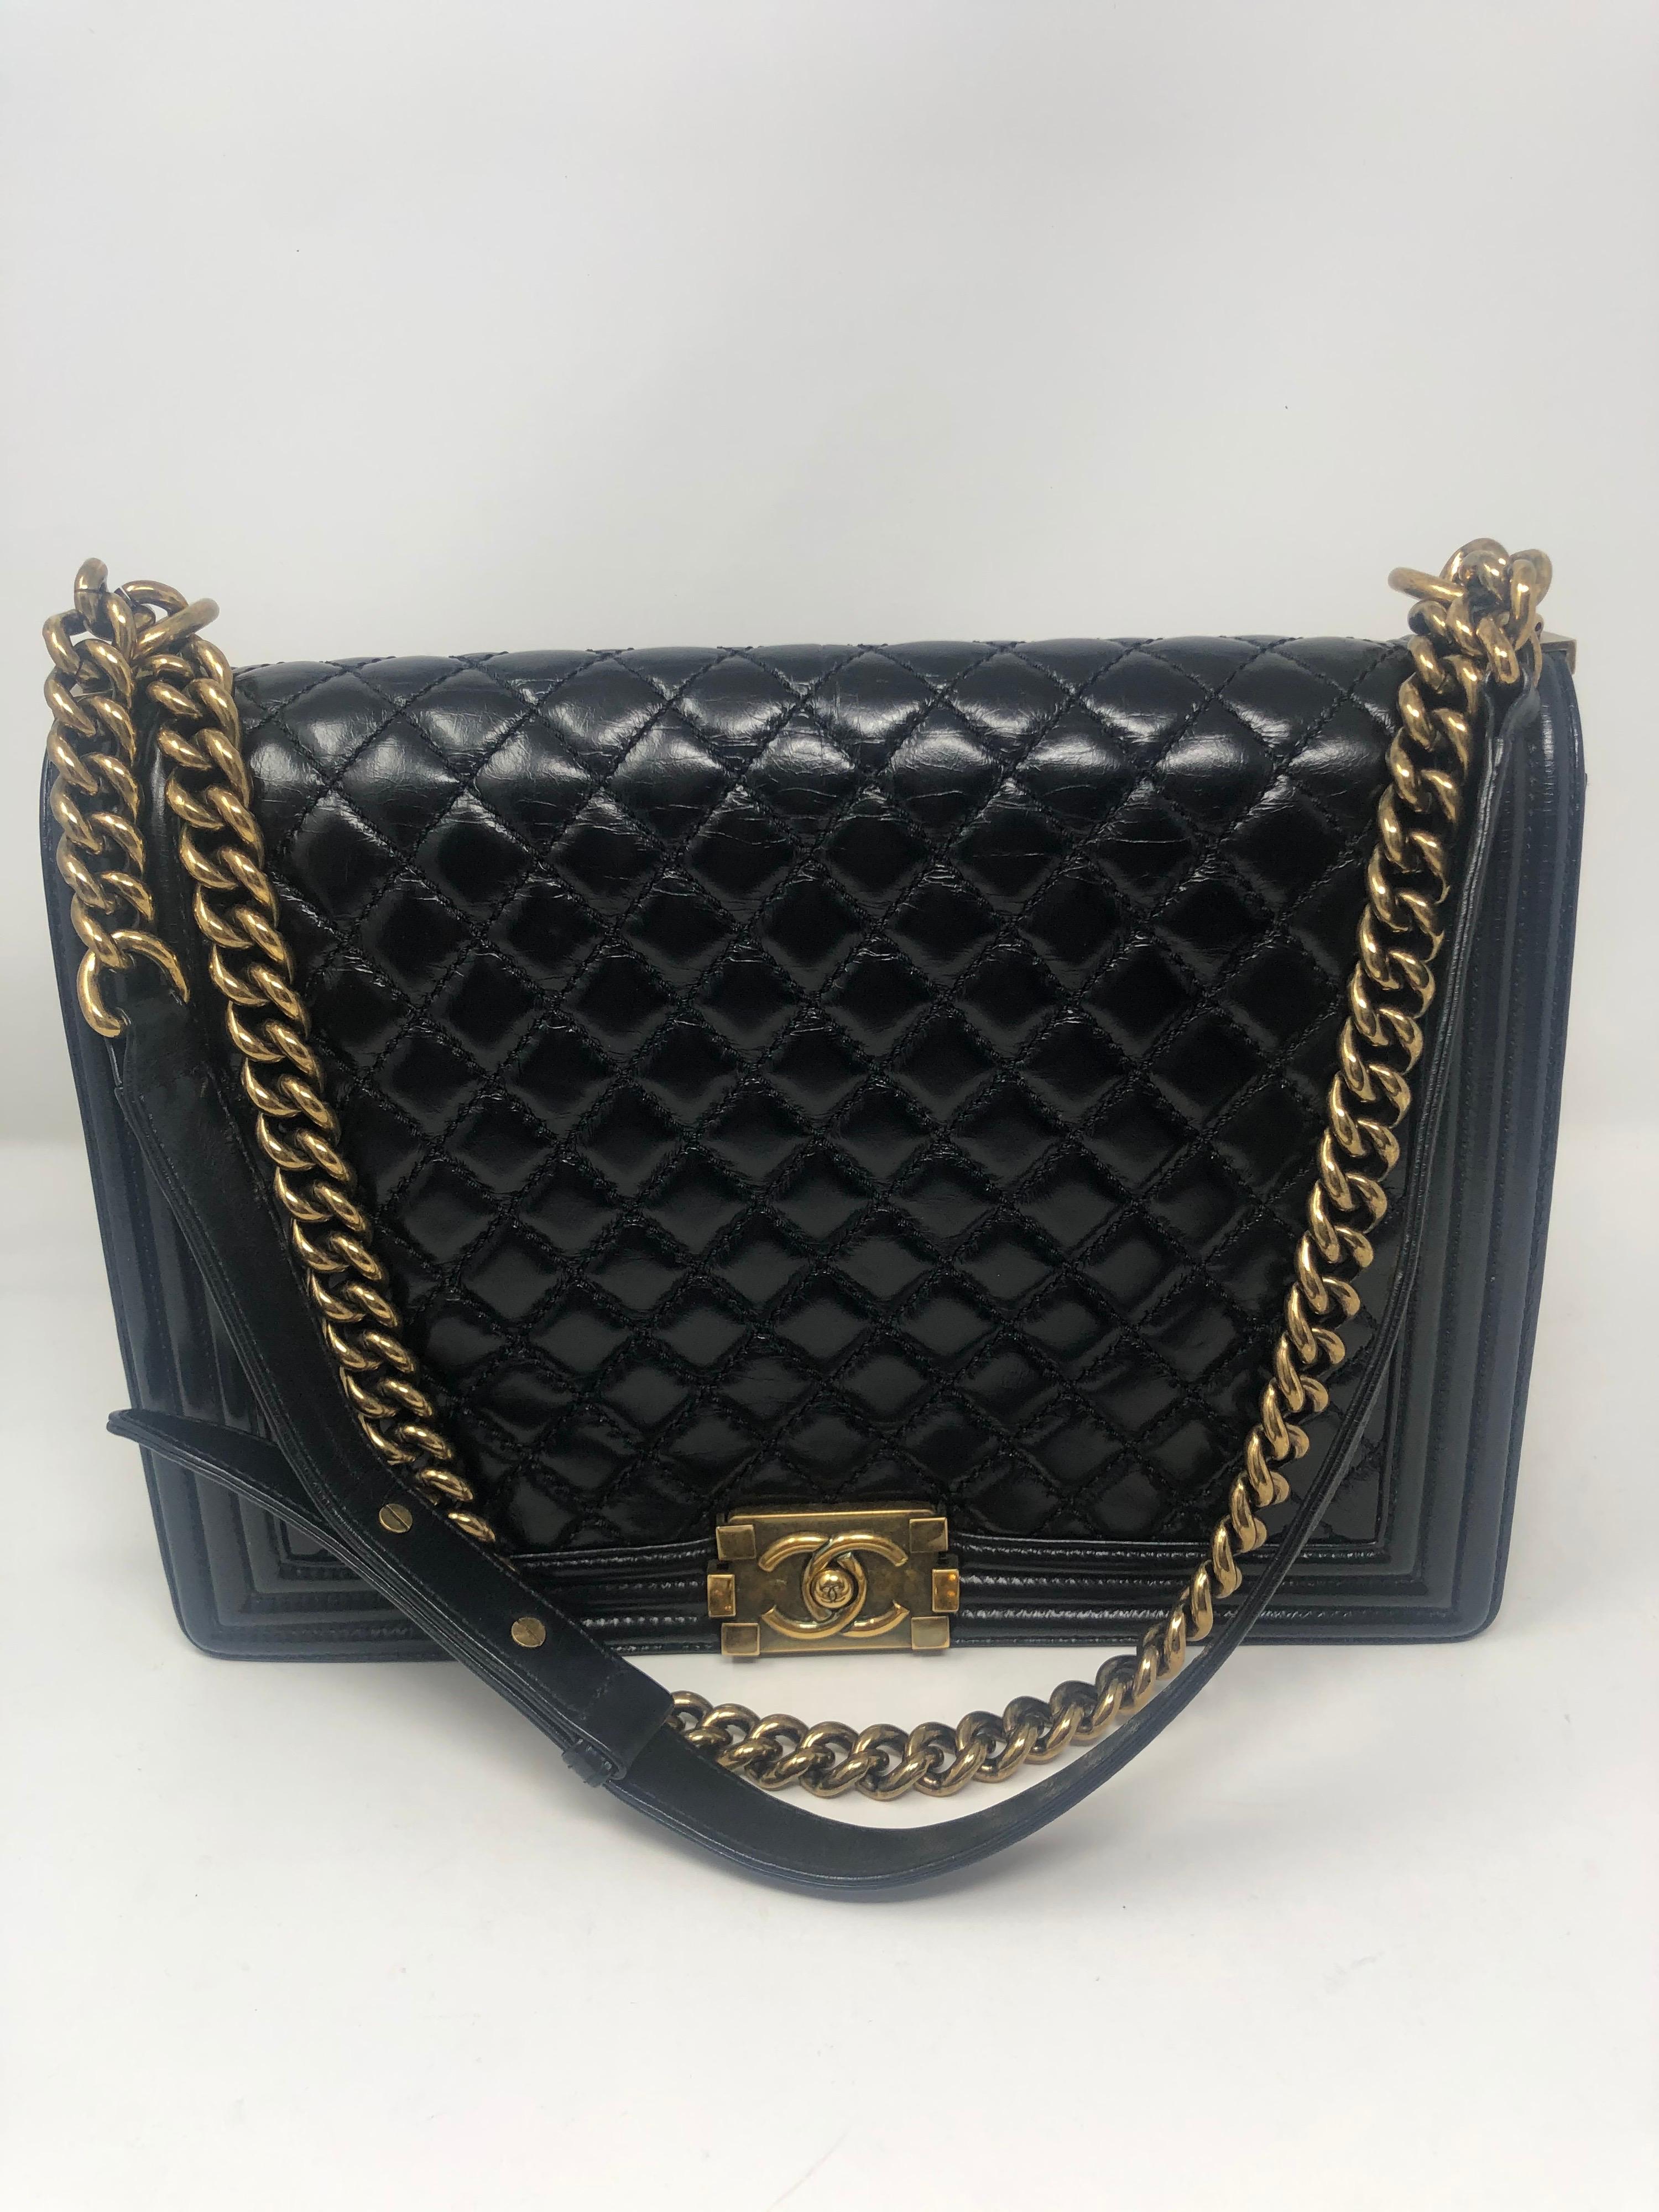 Chanel Boy Large Black Bag. Chanel lambskin with antique gold hardware. Large size can be worn crossbody or doubled as a shoulder bag. Excellent condition. Great investment bag. Guaranteed authentic. 